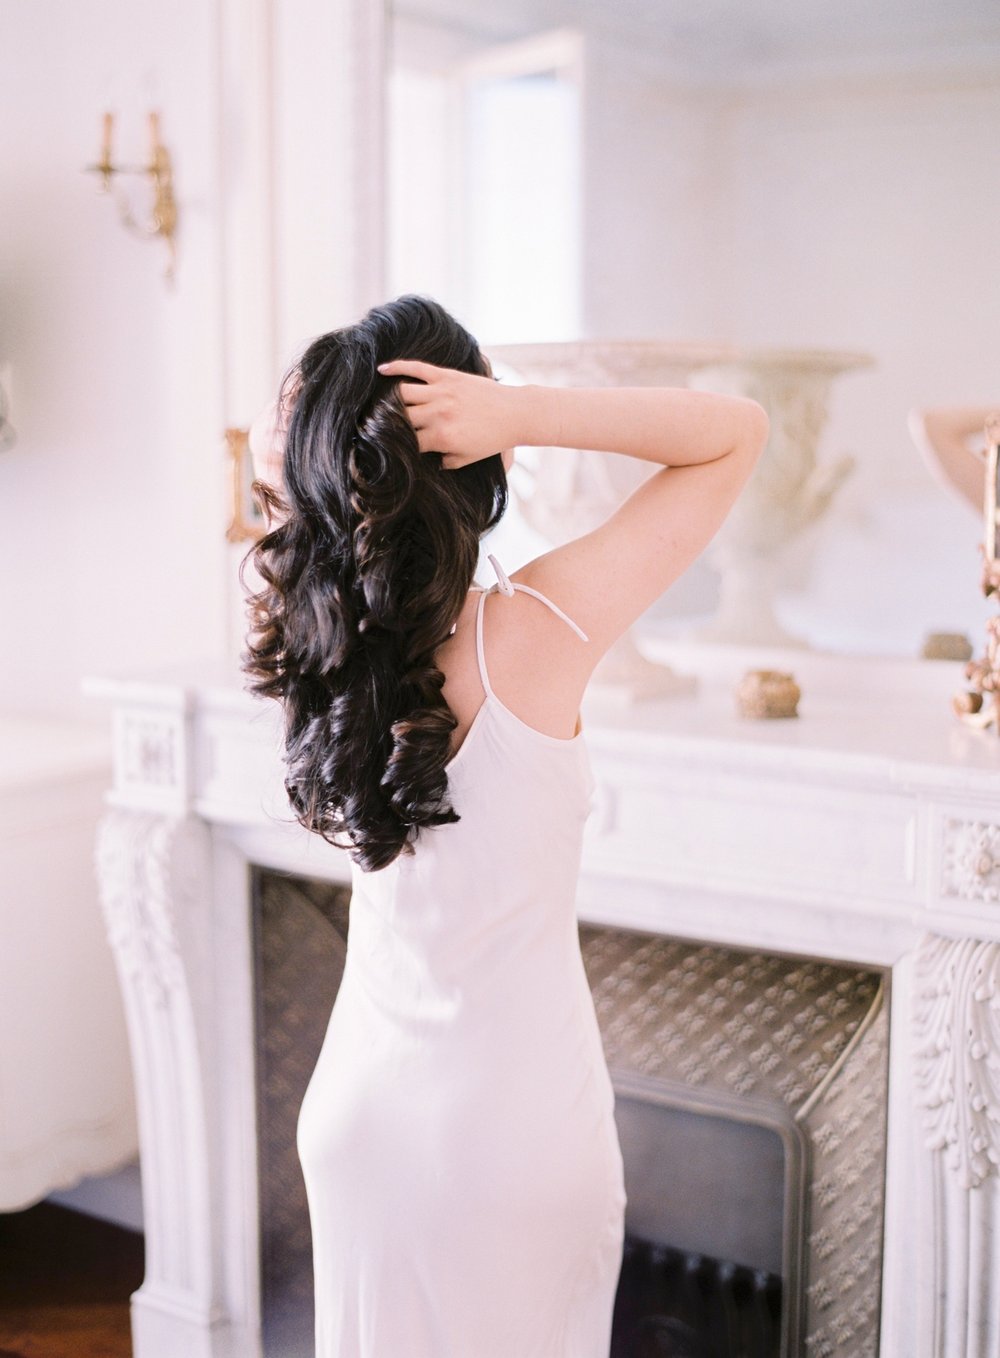 Boudoir photoshoot in Paris, makeup and hair styling by Onorina Jomir Beauty